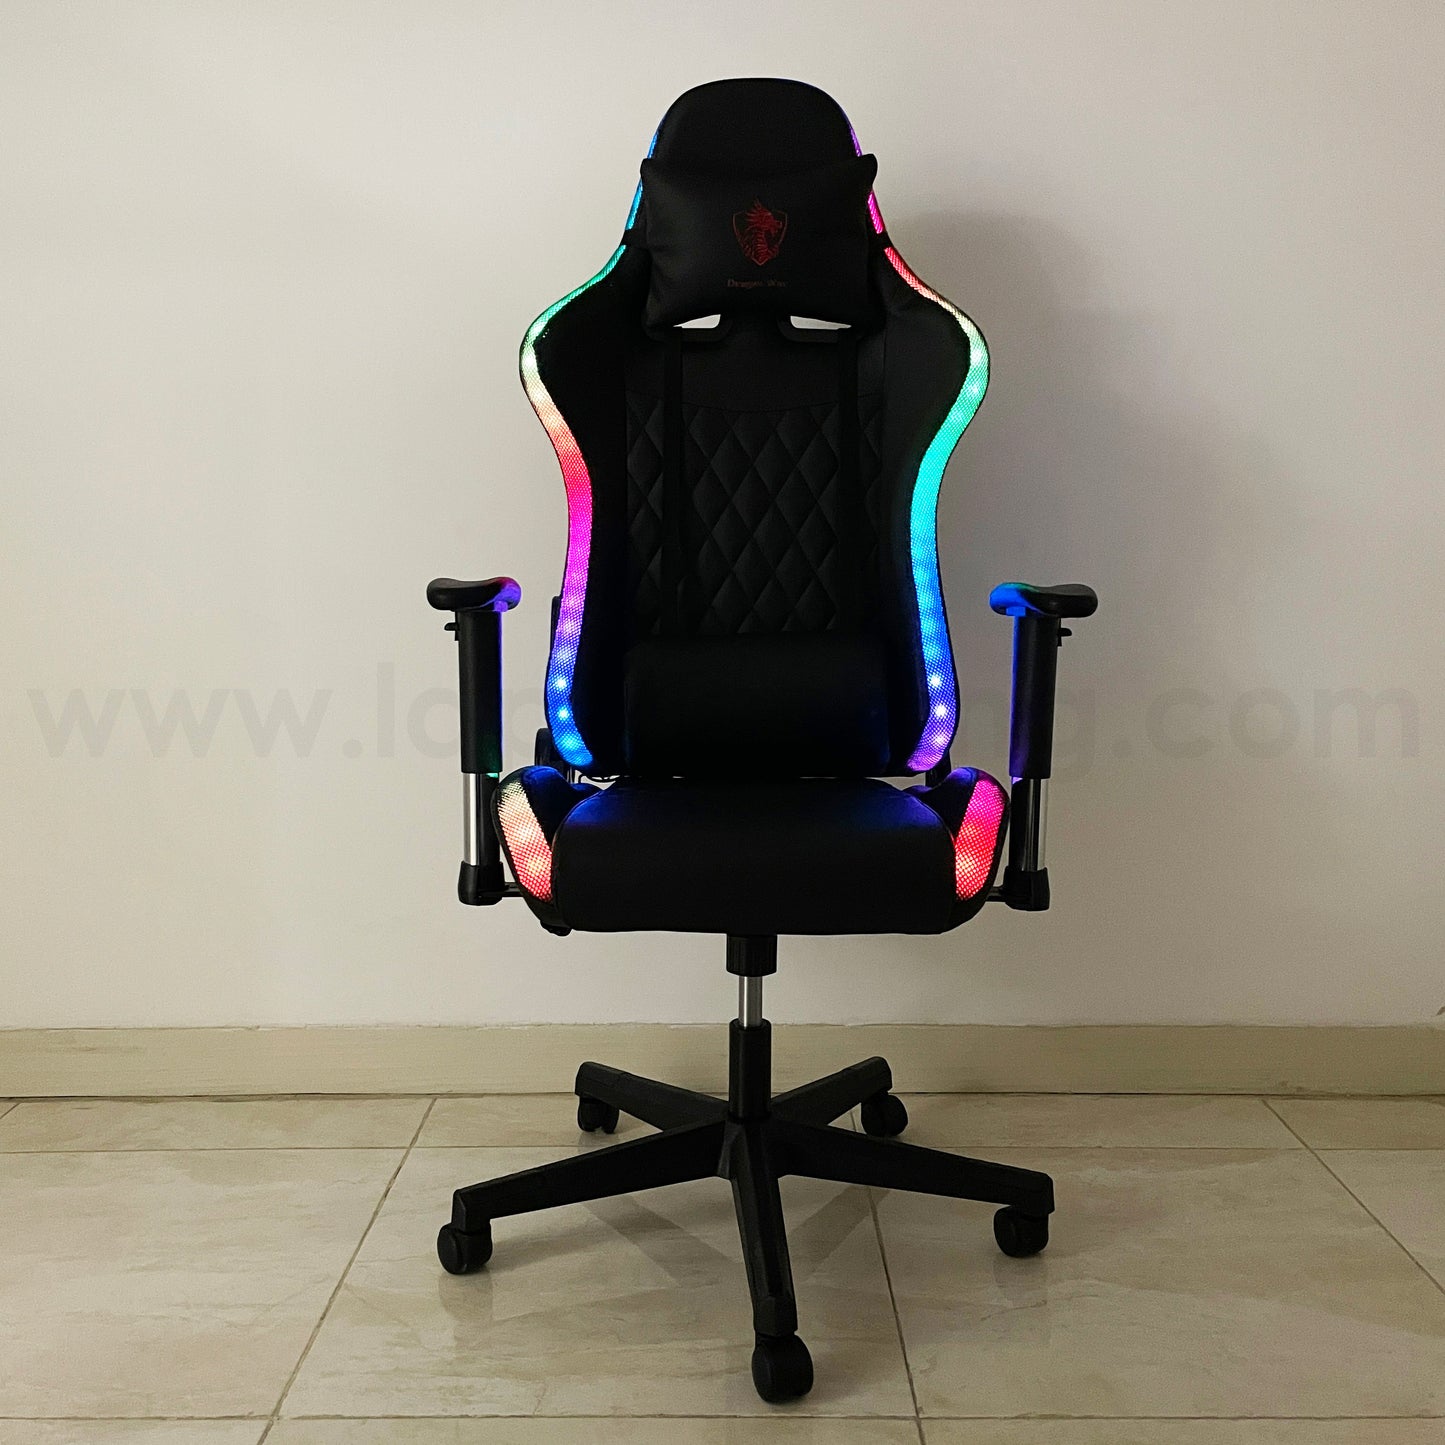 Dragon War GM-203L Rgb With Remote | High Quality Gaming Chair Offer (Brand New)